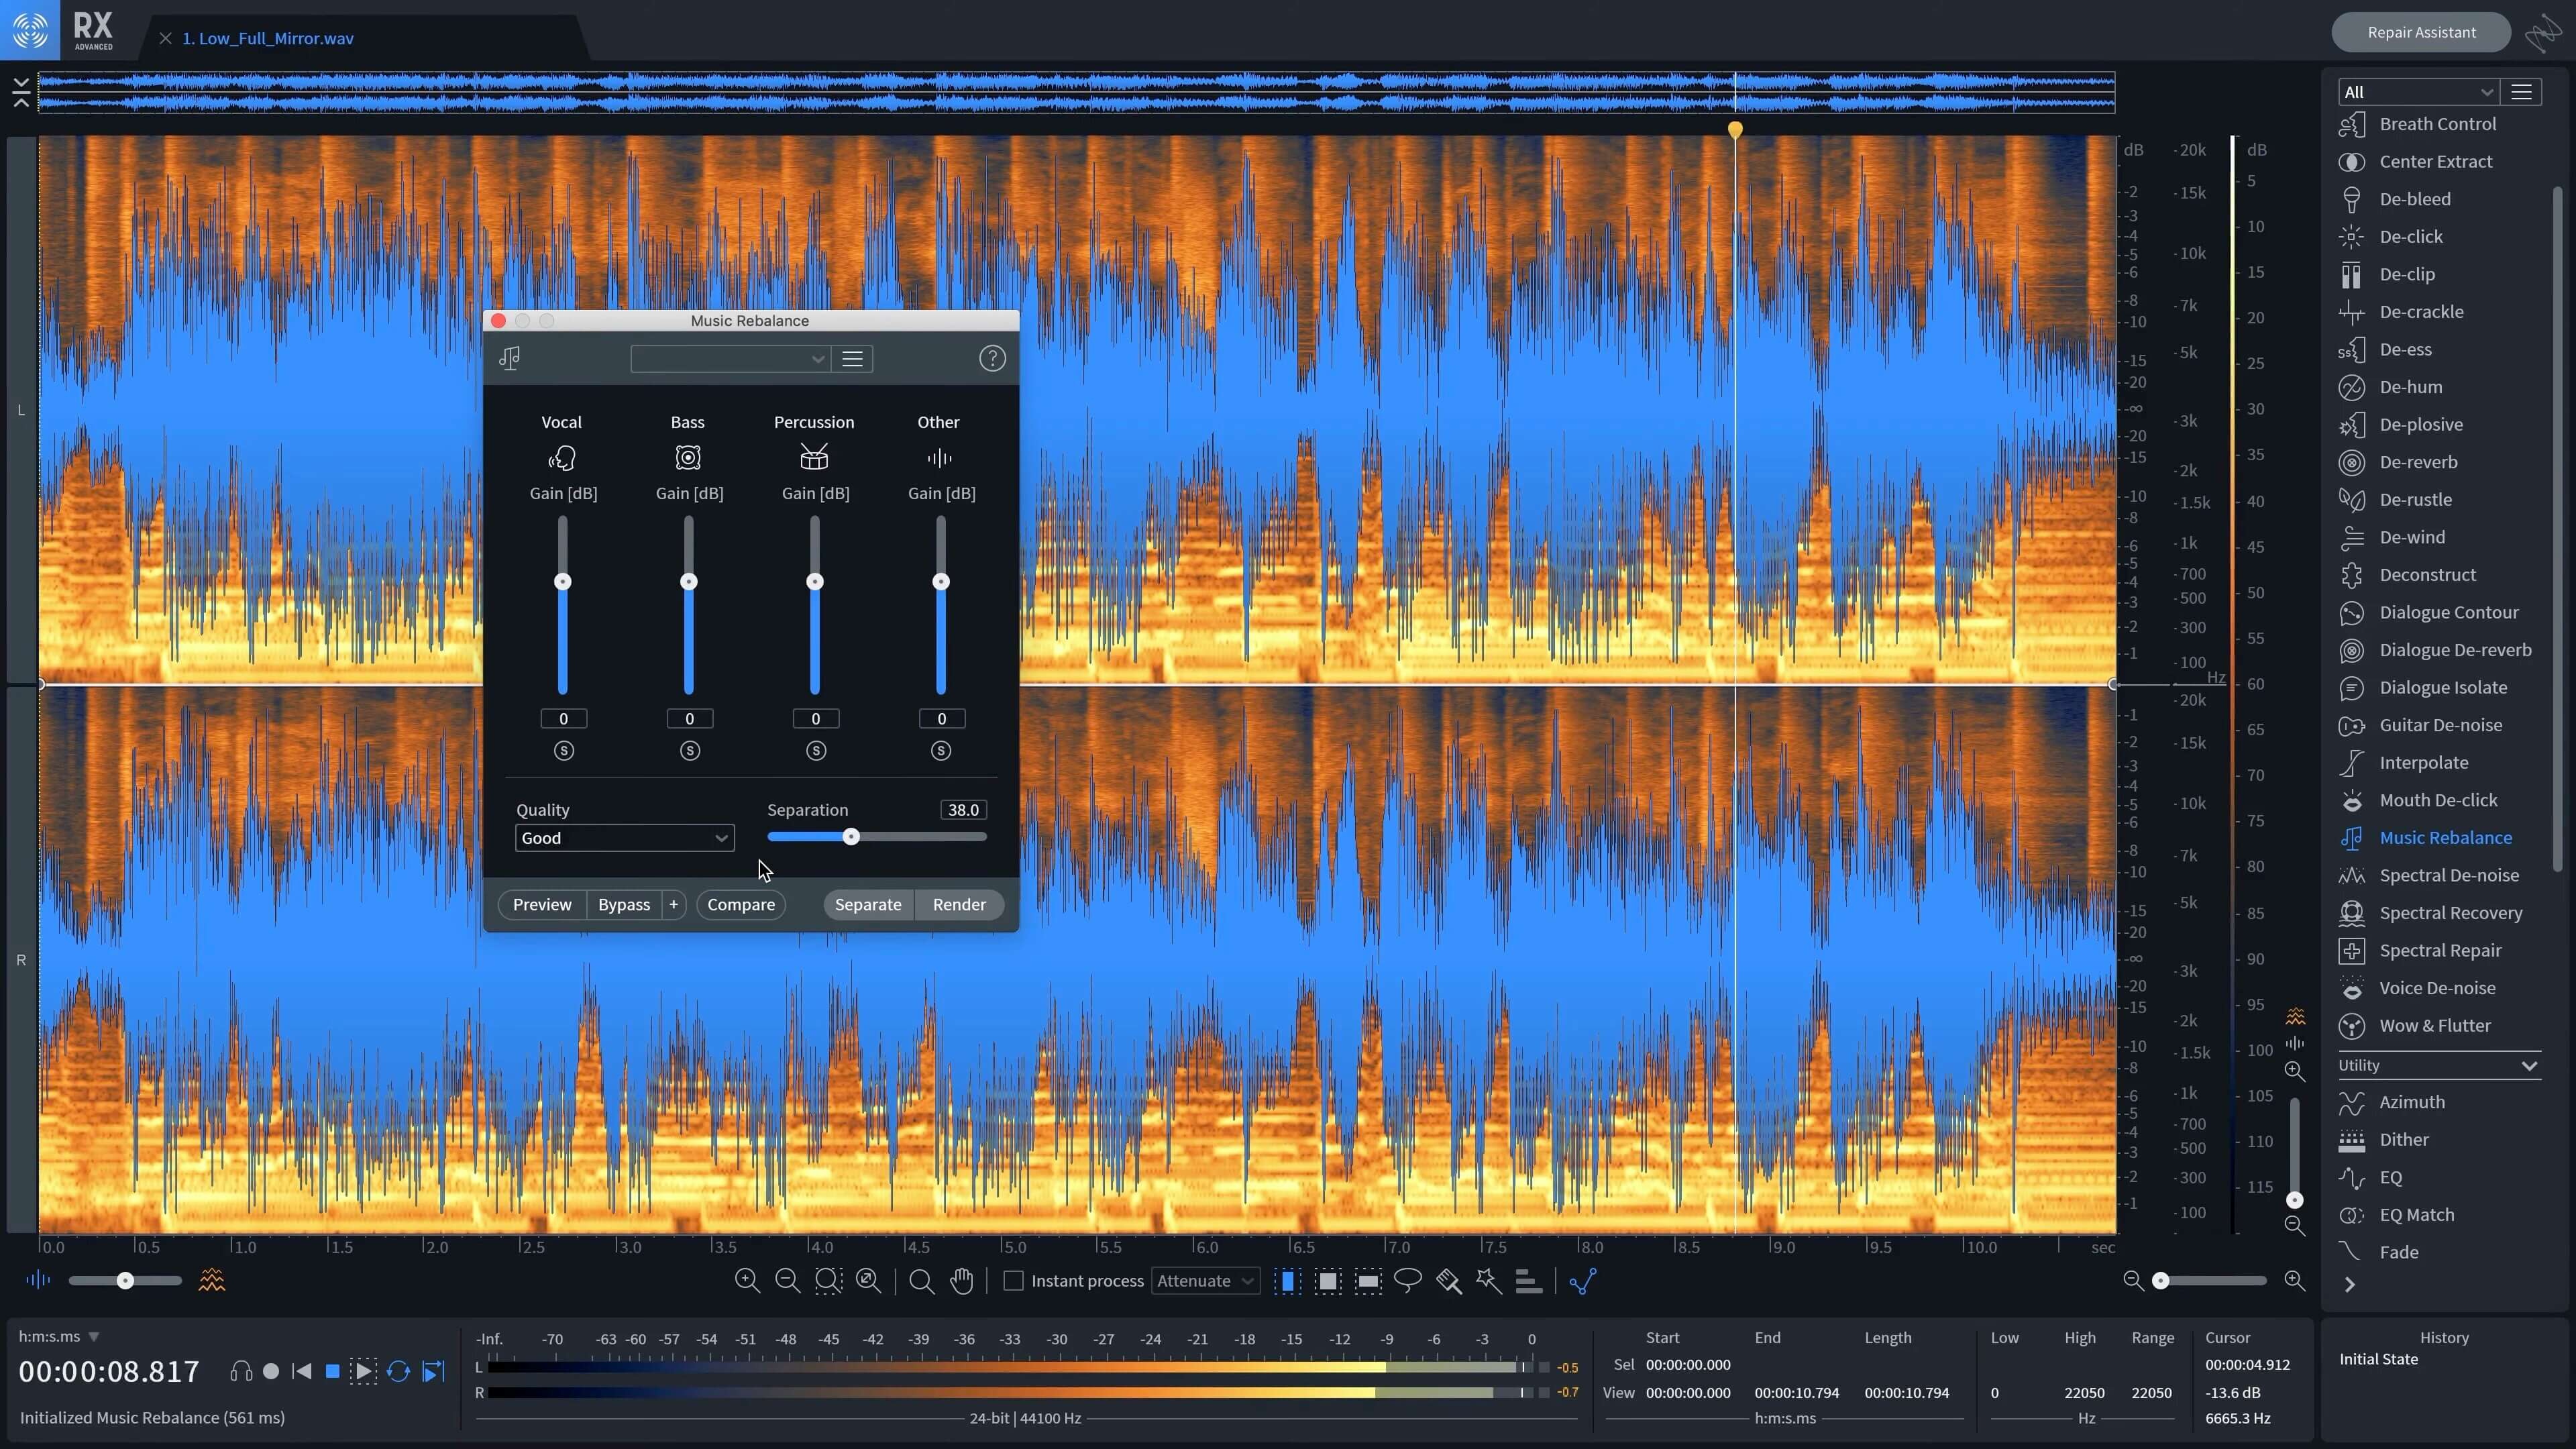 installing izotope rx6 in audacity for mac